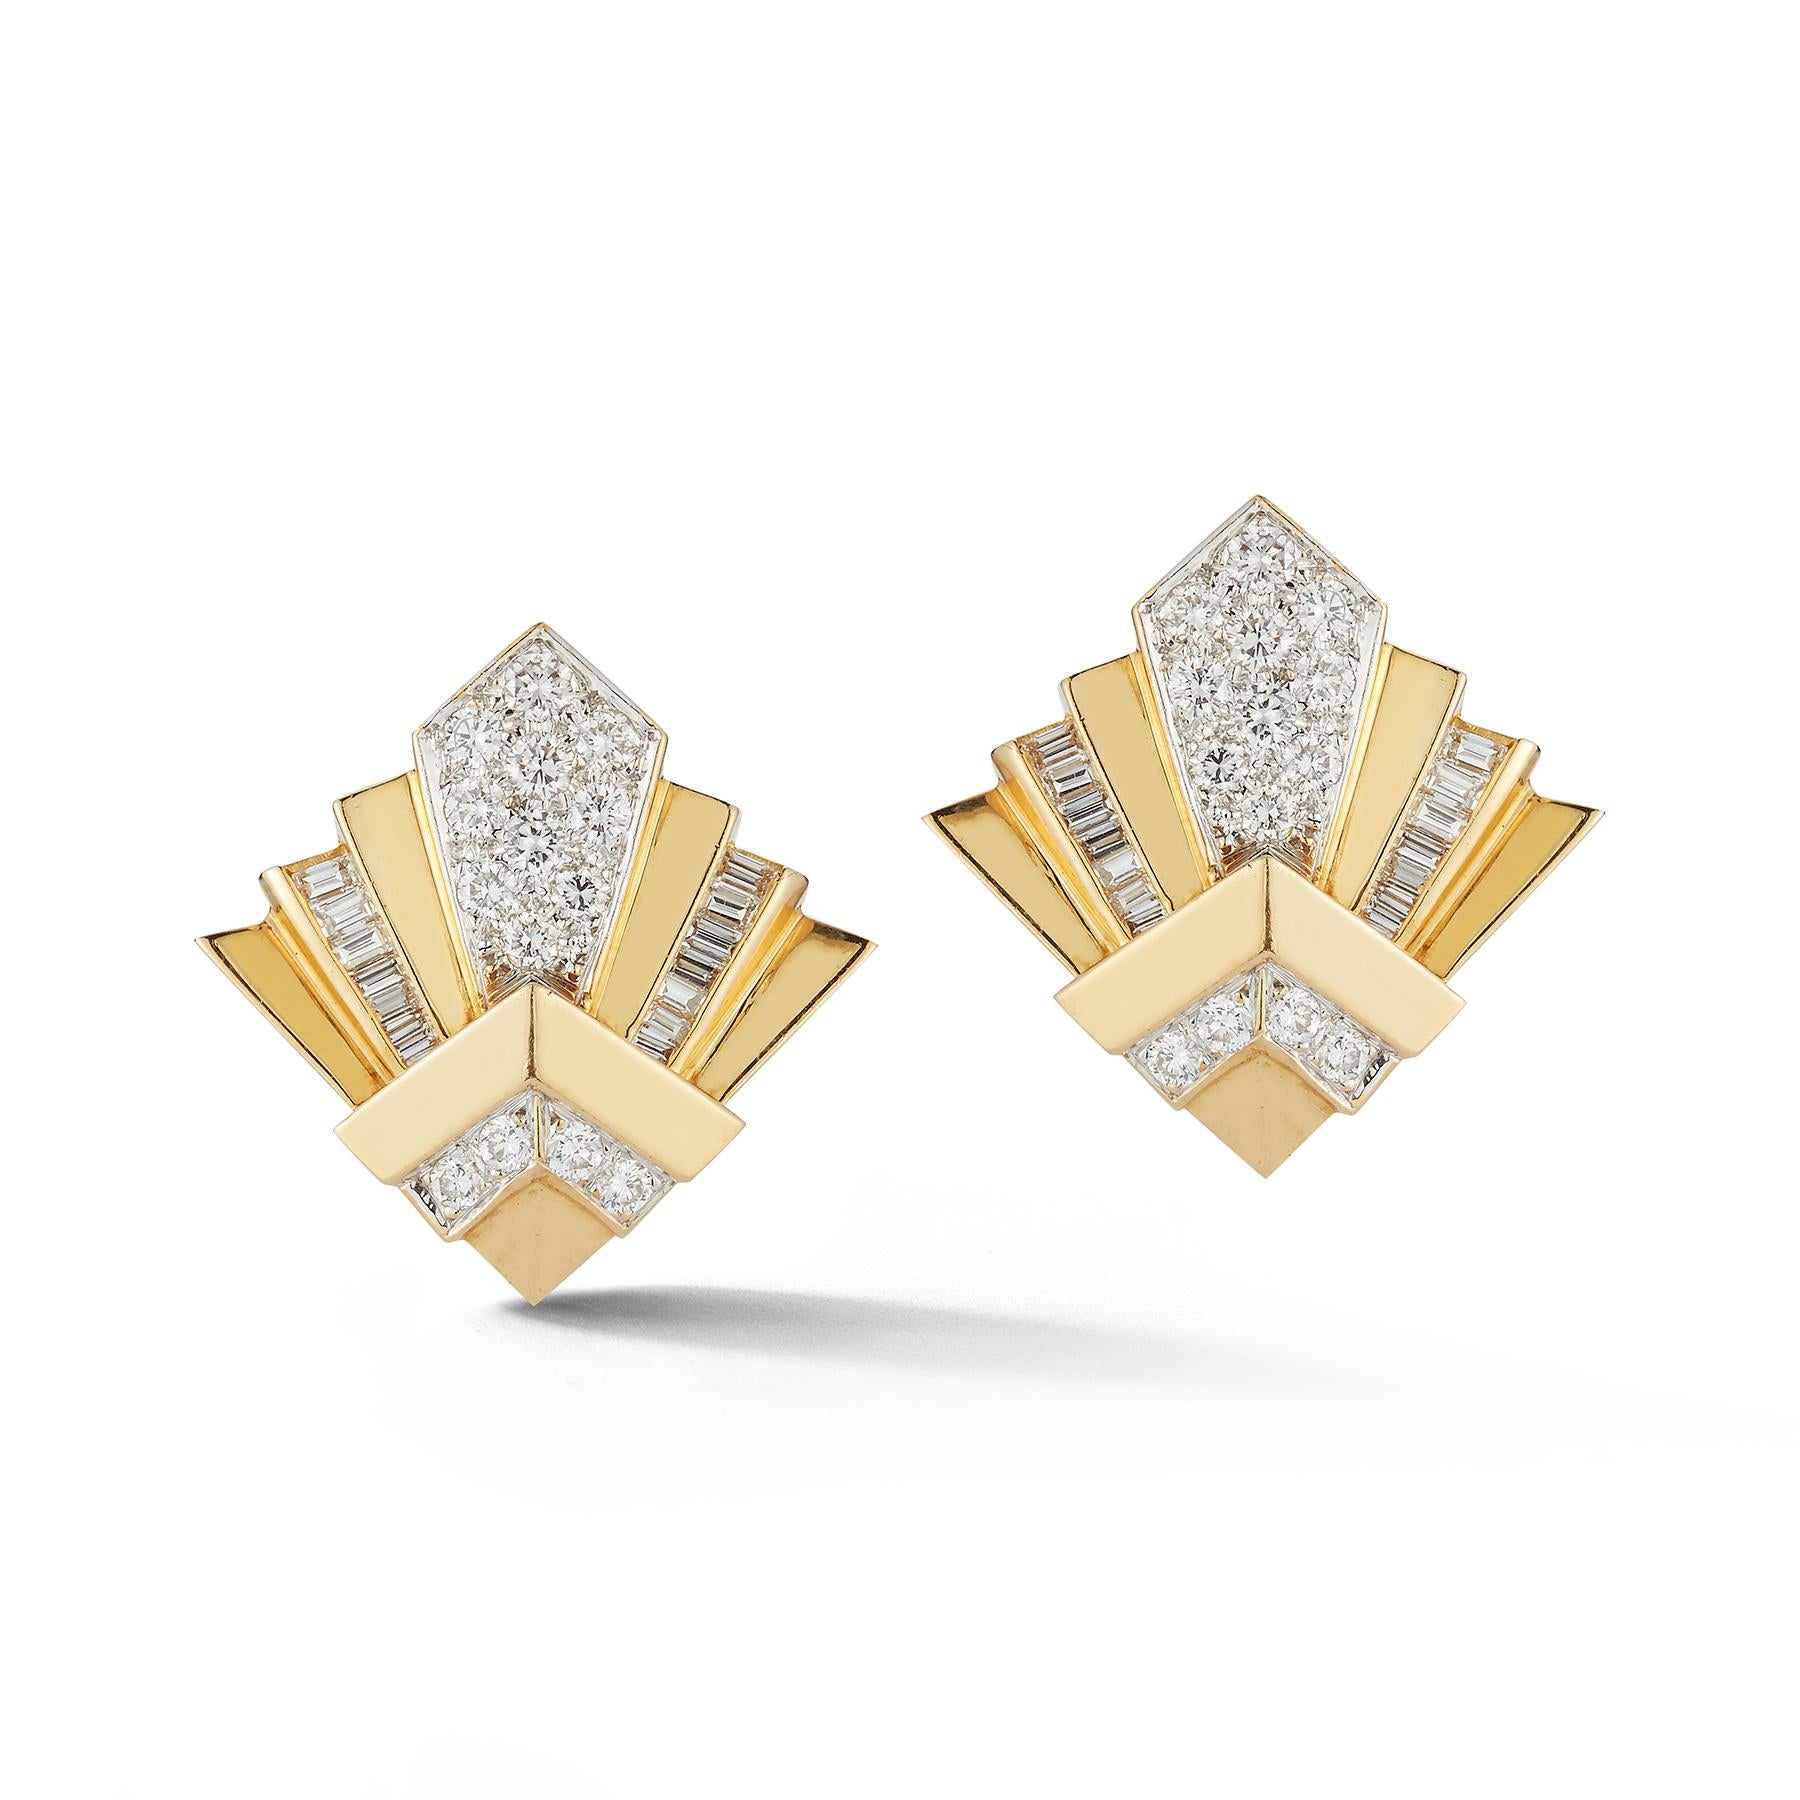 Yellow Gold and Diamond Geometric Earrings

Baguette Diamond Weight: approximately .96 cts 
Round Diamond Weight: approximately 1.68 cts 

Measurements: 1